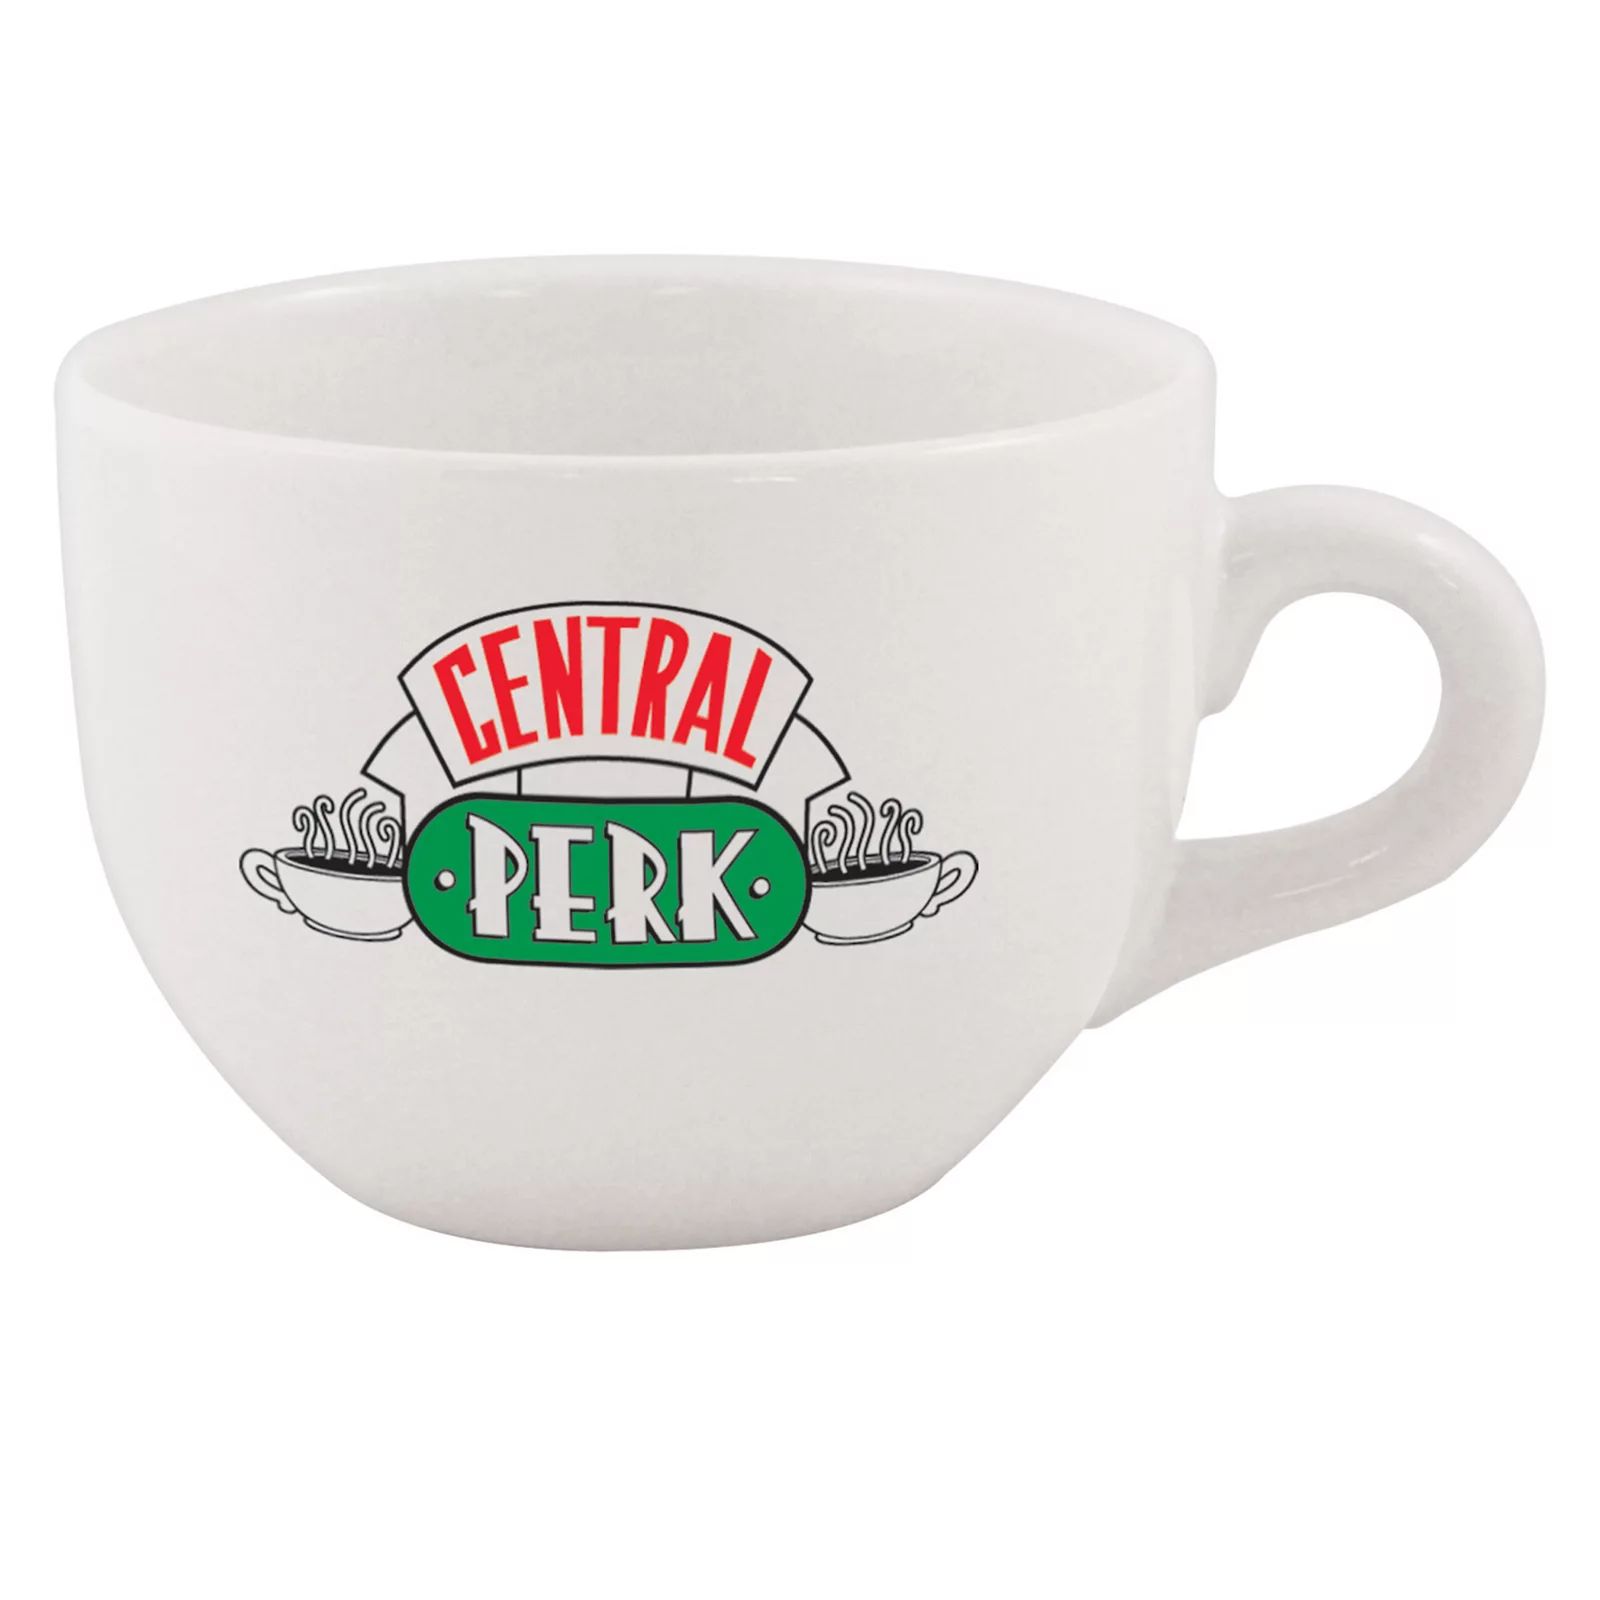 Friends ""Central Perk"" Inverted Handle 24-Ounce Mug by ICUP, White | Kohl's